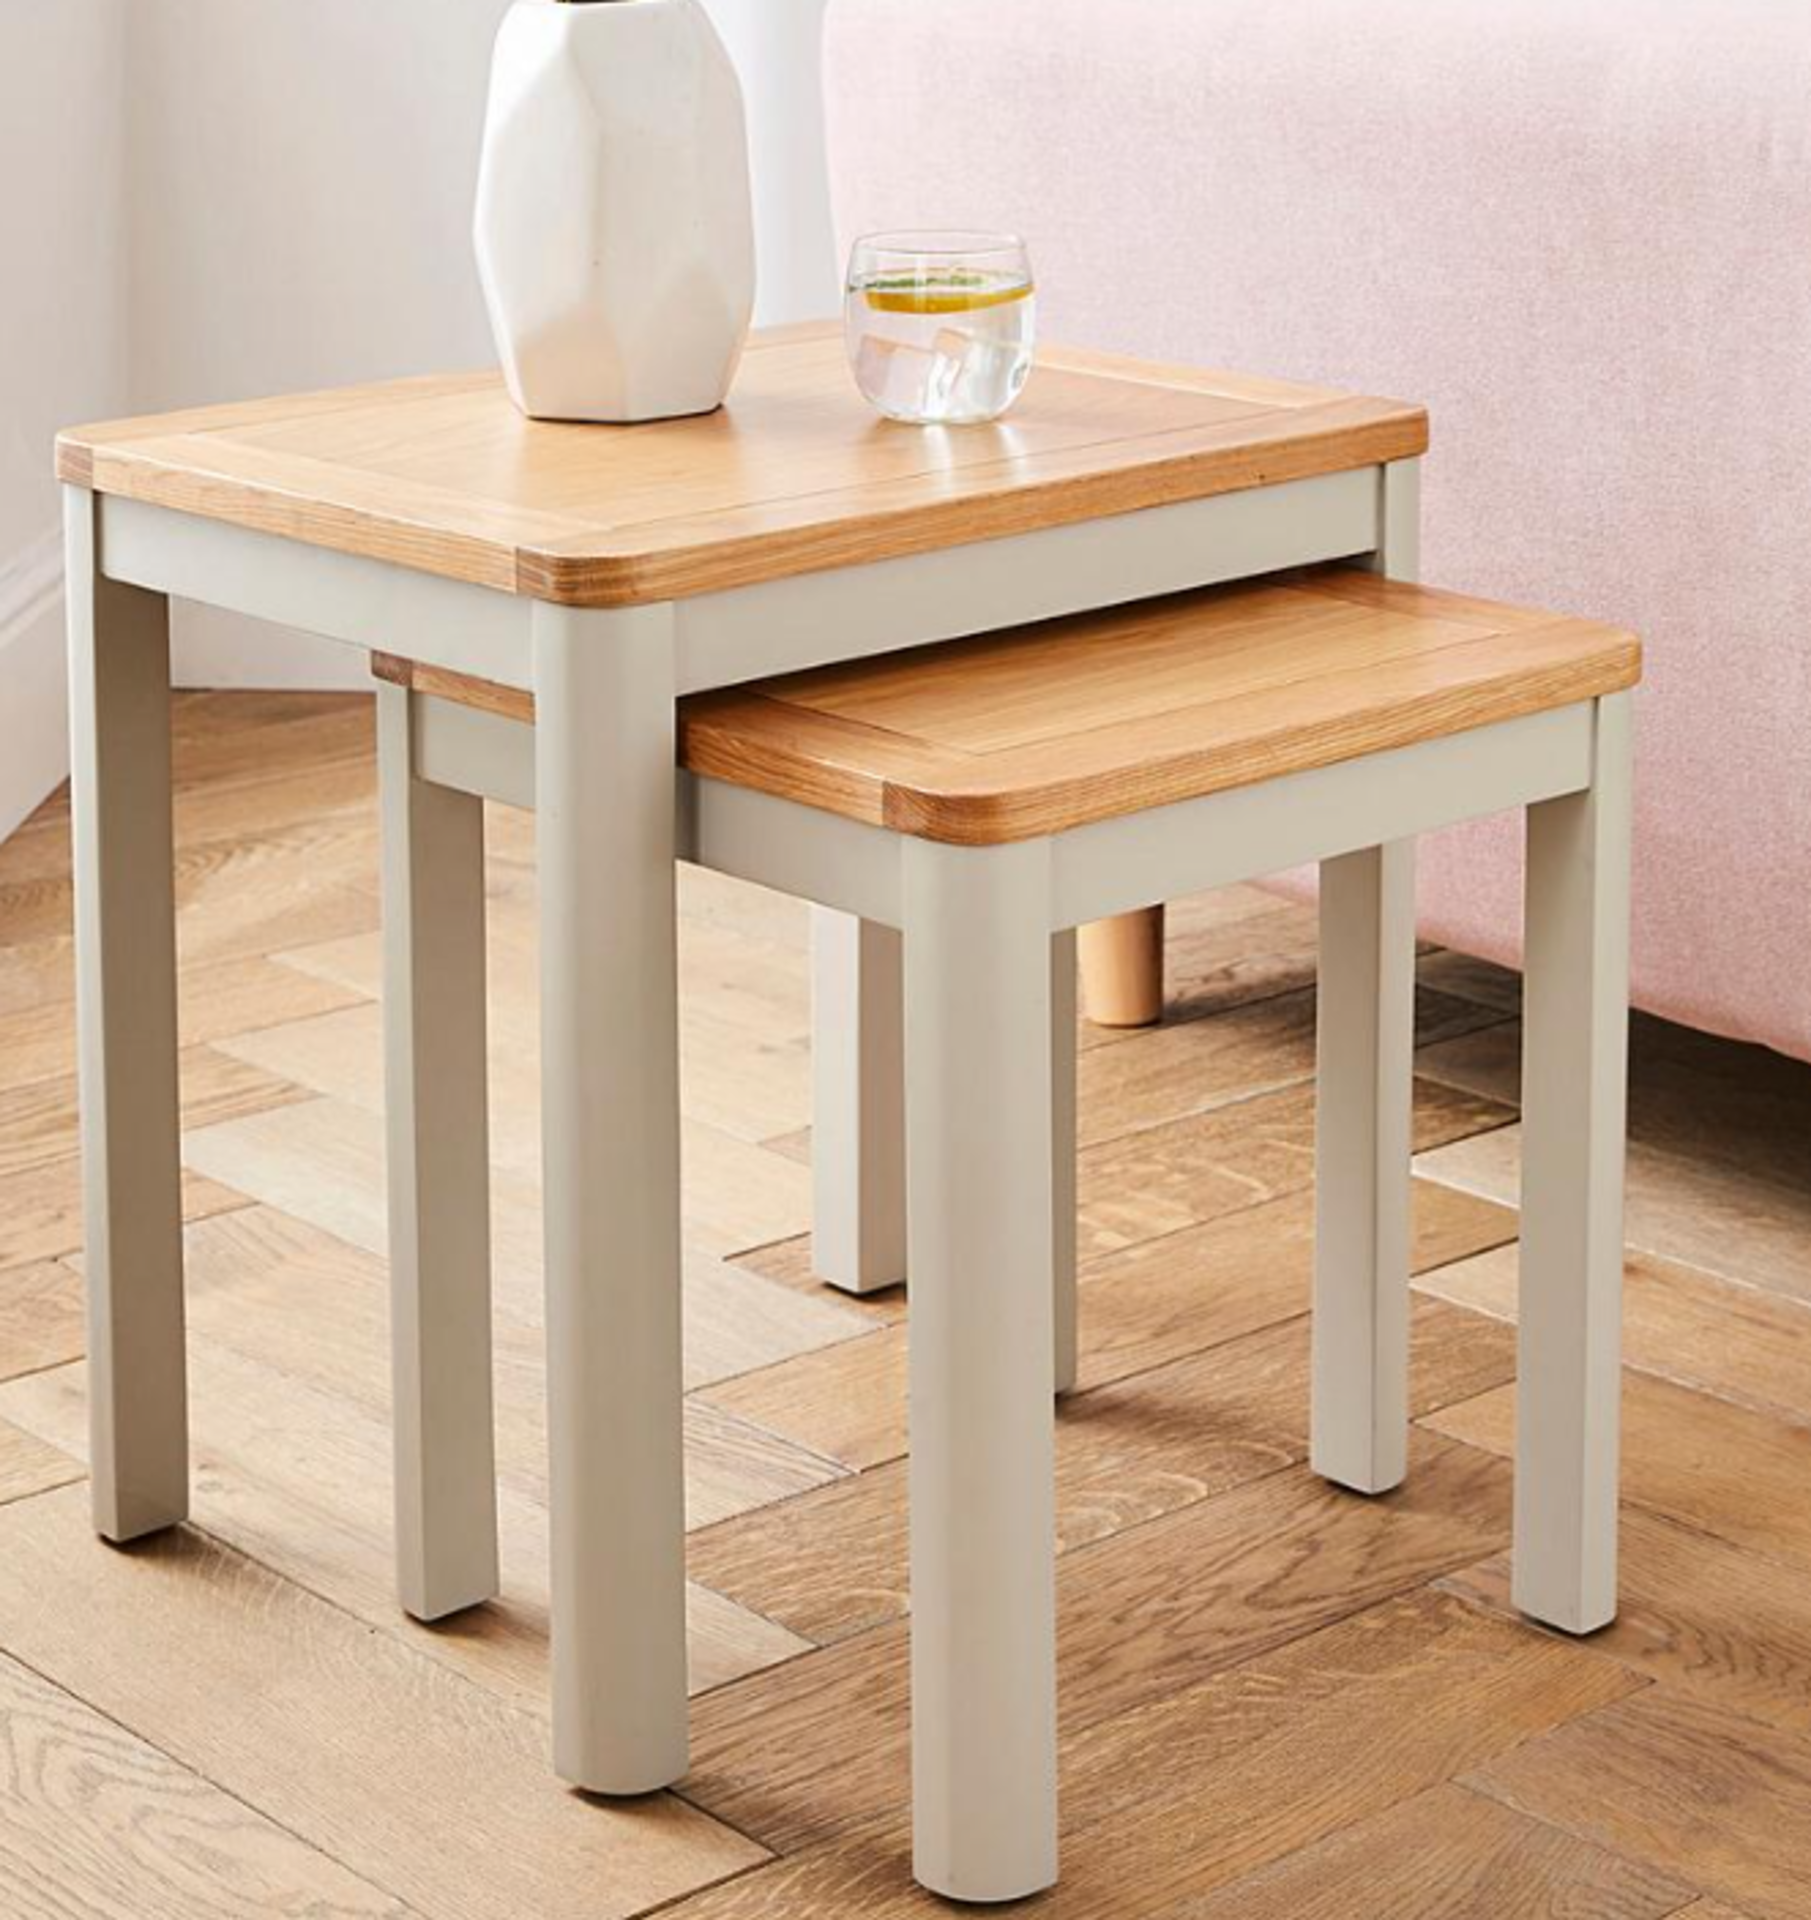 Logan Two-Tone Nest of 2 Tables. - ER20. RRP £239.00. The Logan Two-Tone range, crafted from solid